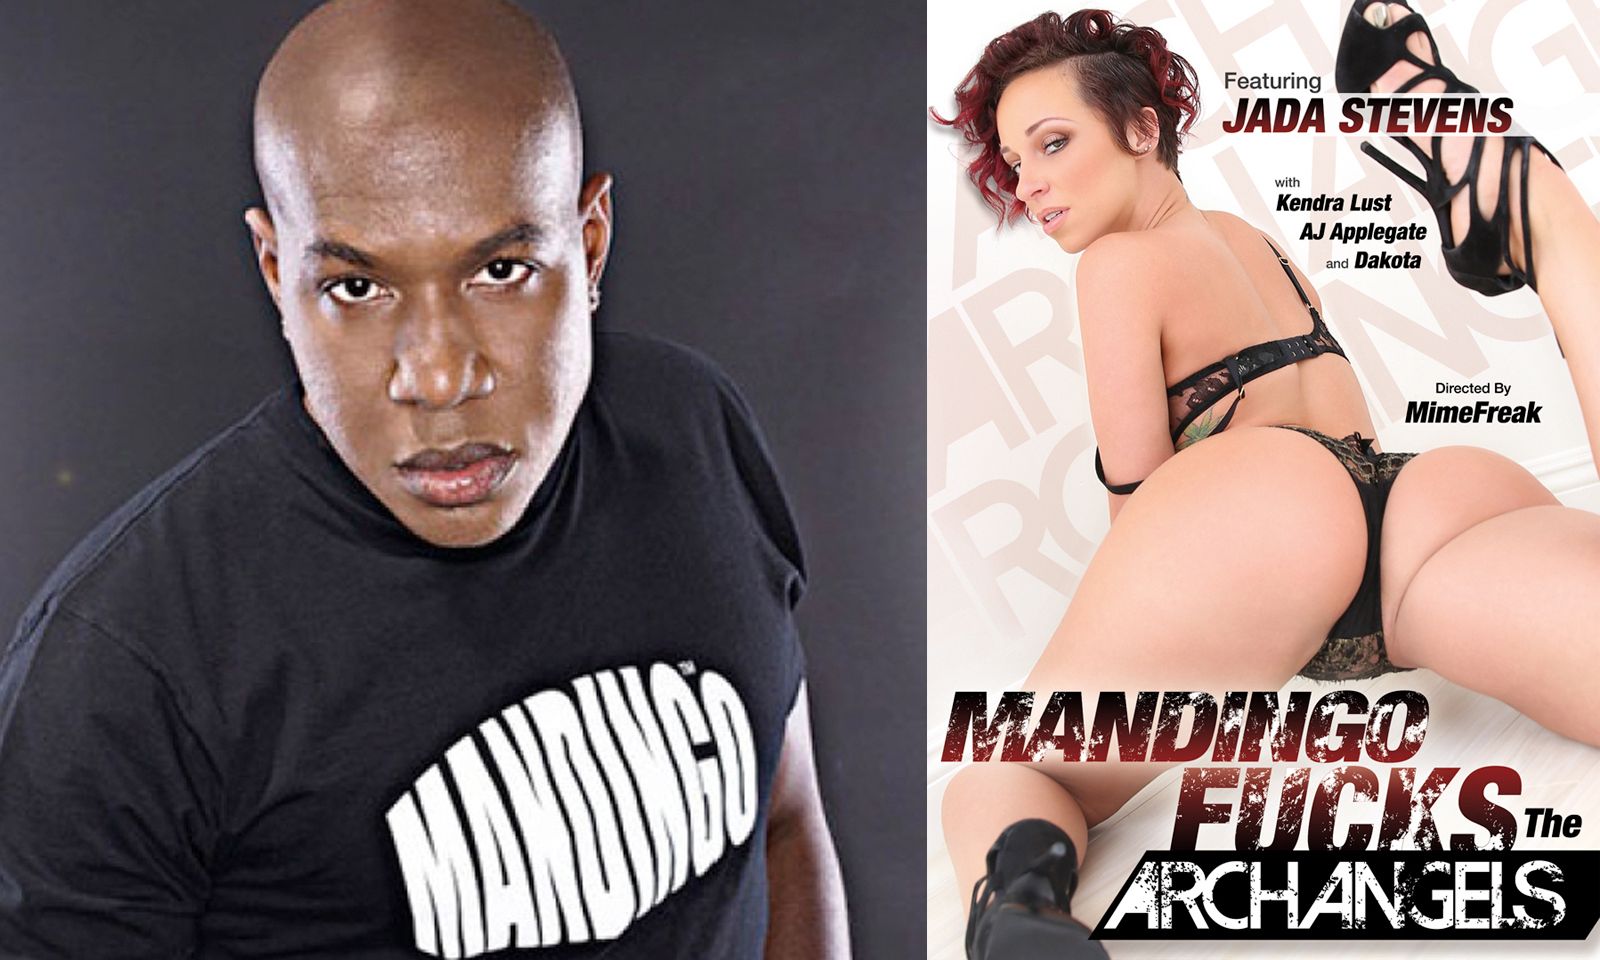 Mandingo Takes On The ArchAngels In New Series